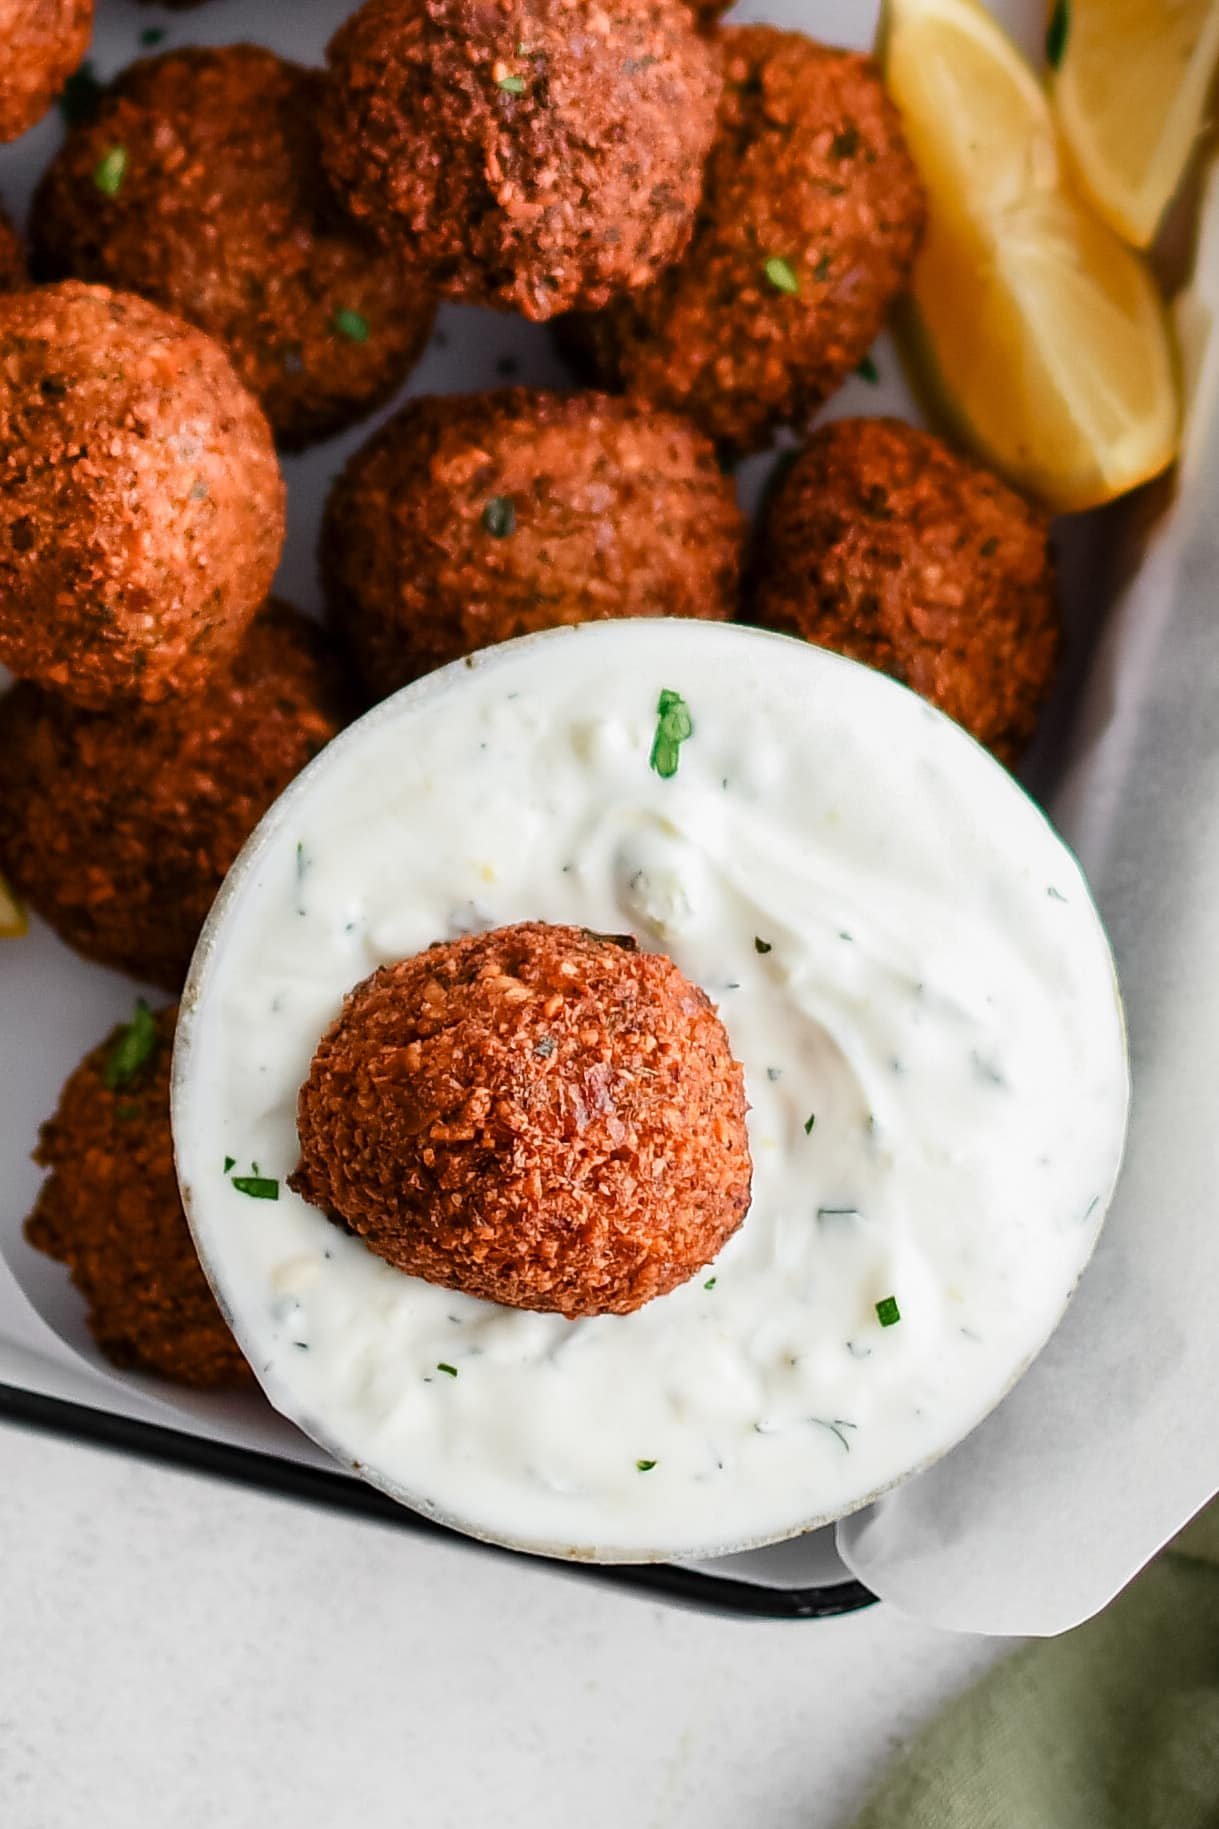 Single fried homemade falafel ball in a small bowl filled with tzatziki.